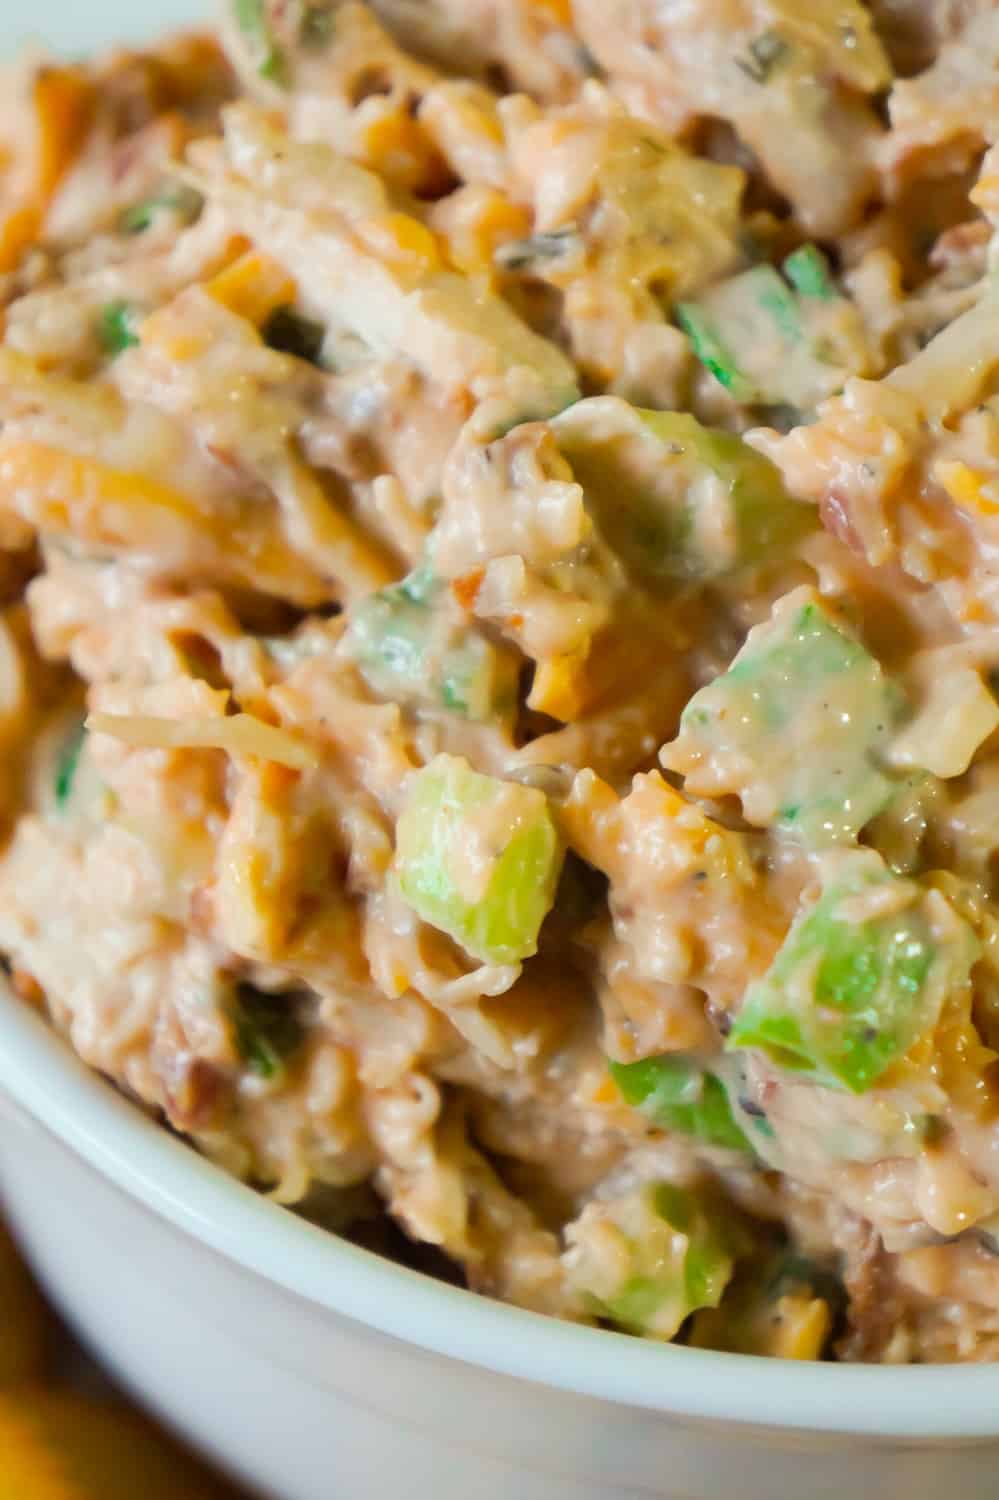 BBQ Chicken Dip is a delicious cold party dip recipe perfect for serving with Ritz Crackers. This flavourful dip is loaded with shredded chicken, crumbled bacon, cheese and BBQ sauce.